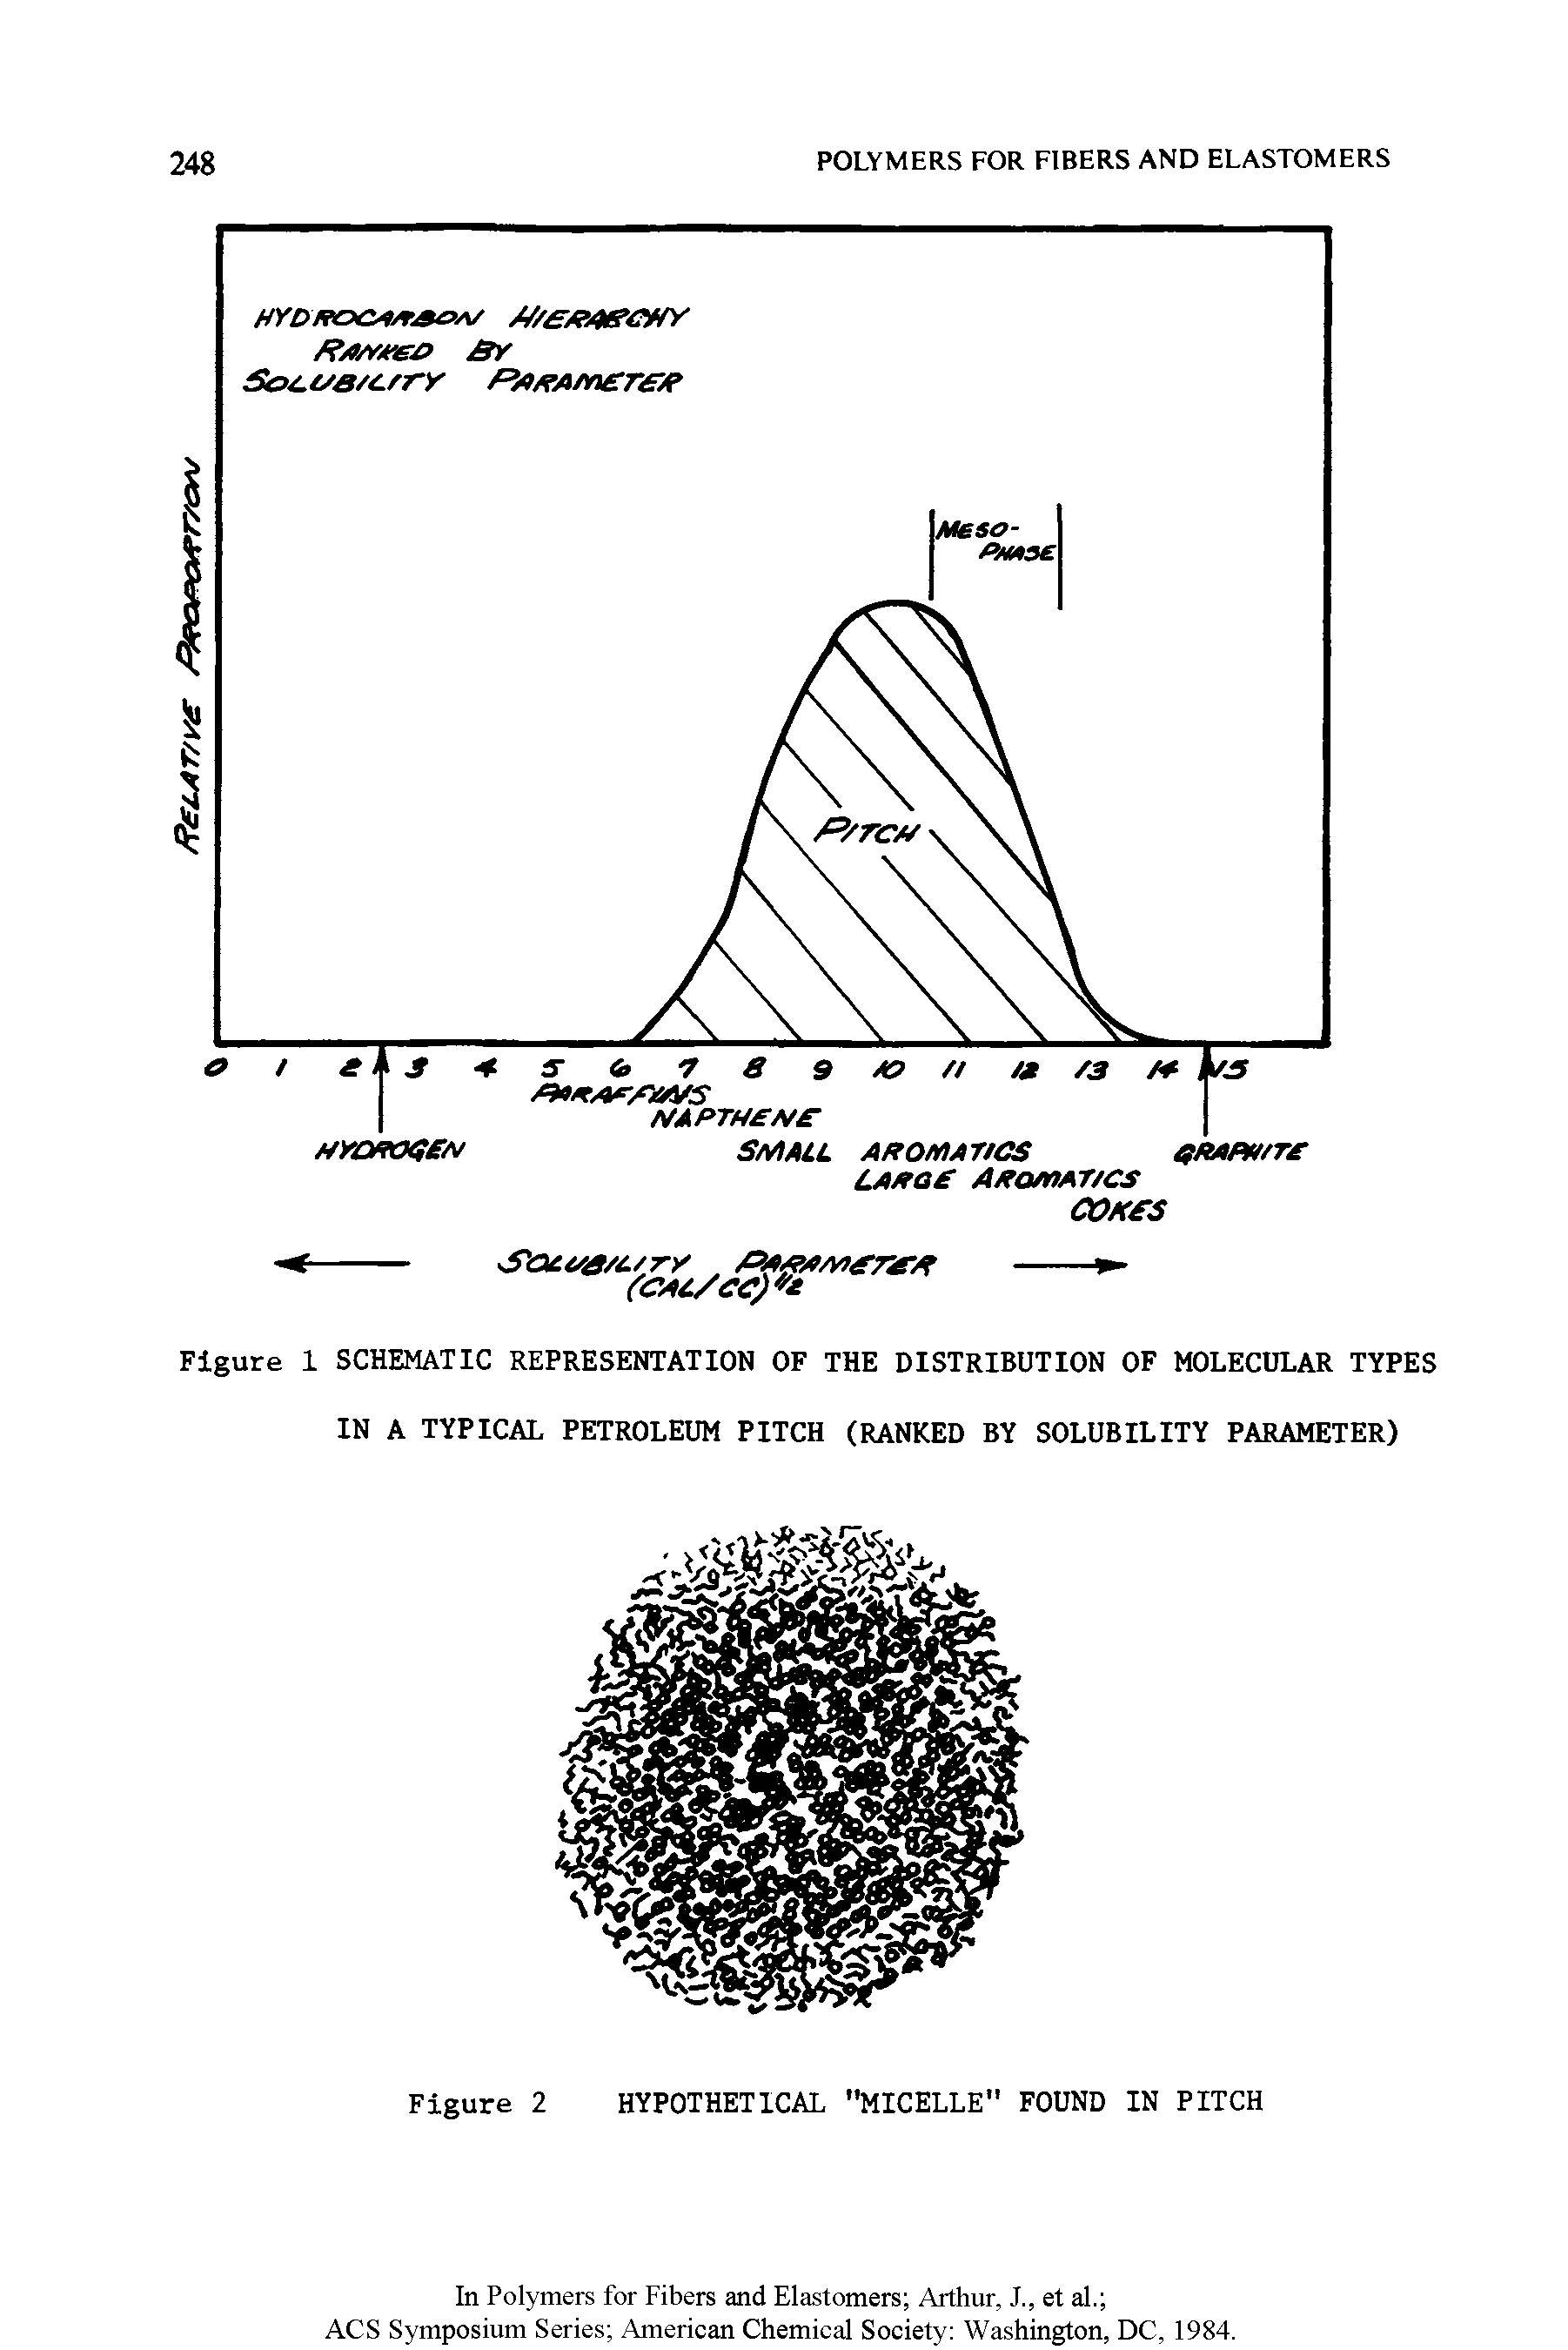 Figure 1 SCHEMATIC REPRESENTATION OF THE DISTRIBUTION OF MOLECULAR TYPES IN A TYPICAL PETROLEUM PITCH (RANKED BY SOLUBILITY PARAMETER)...